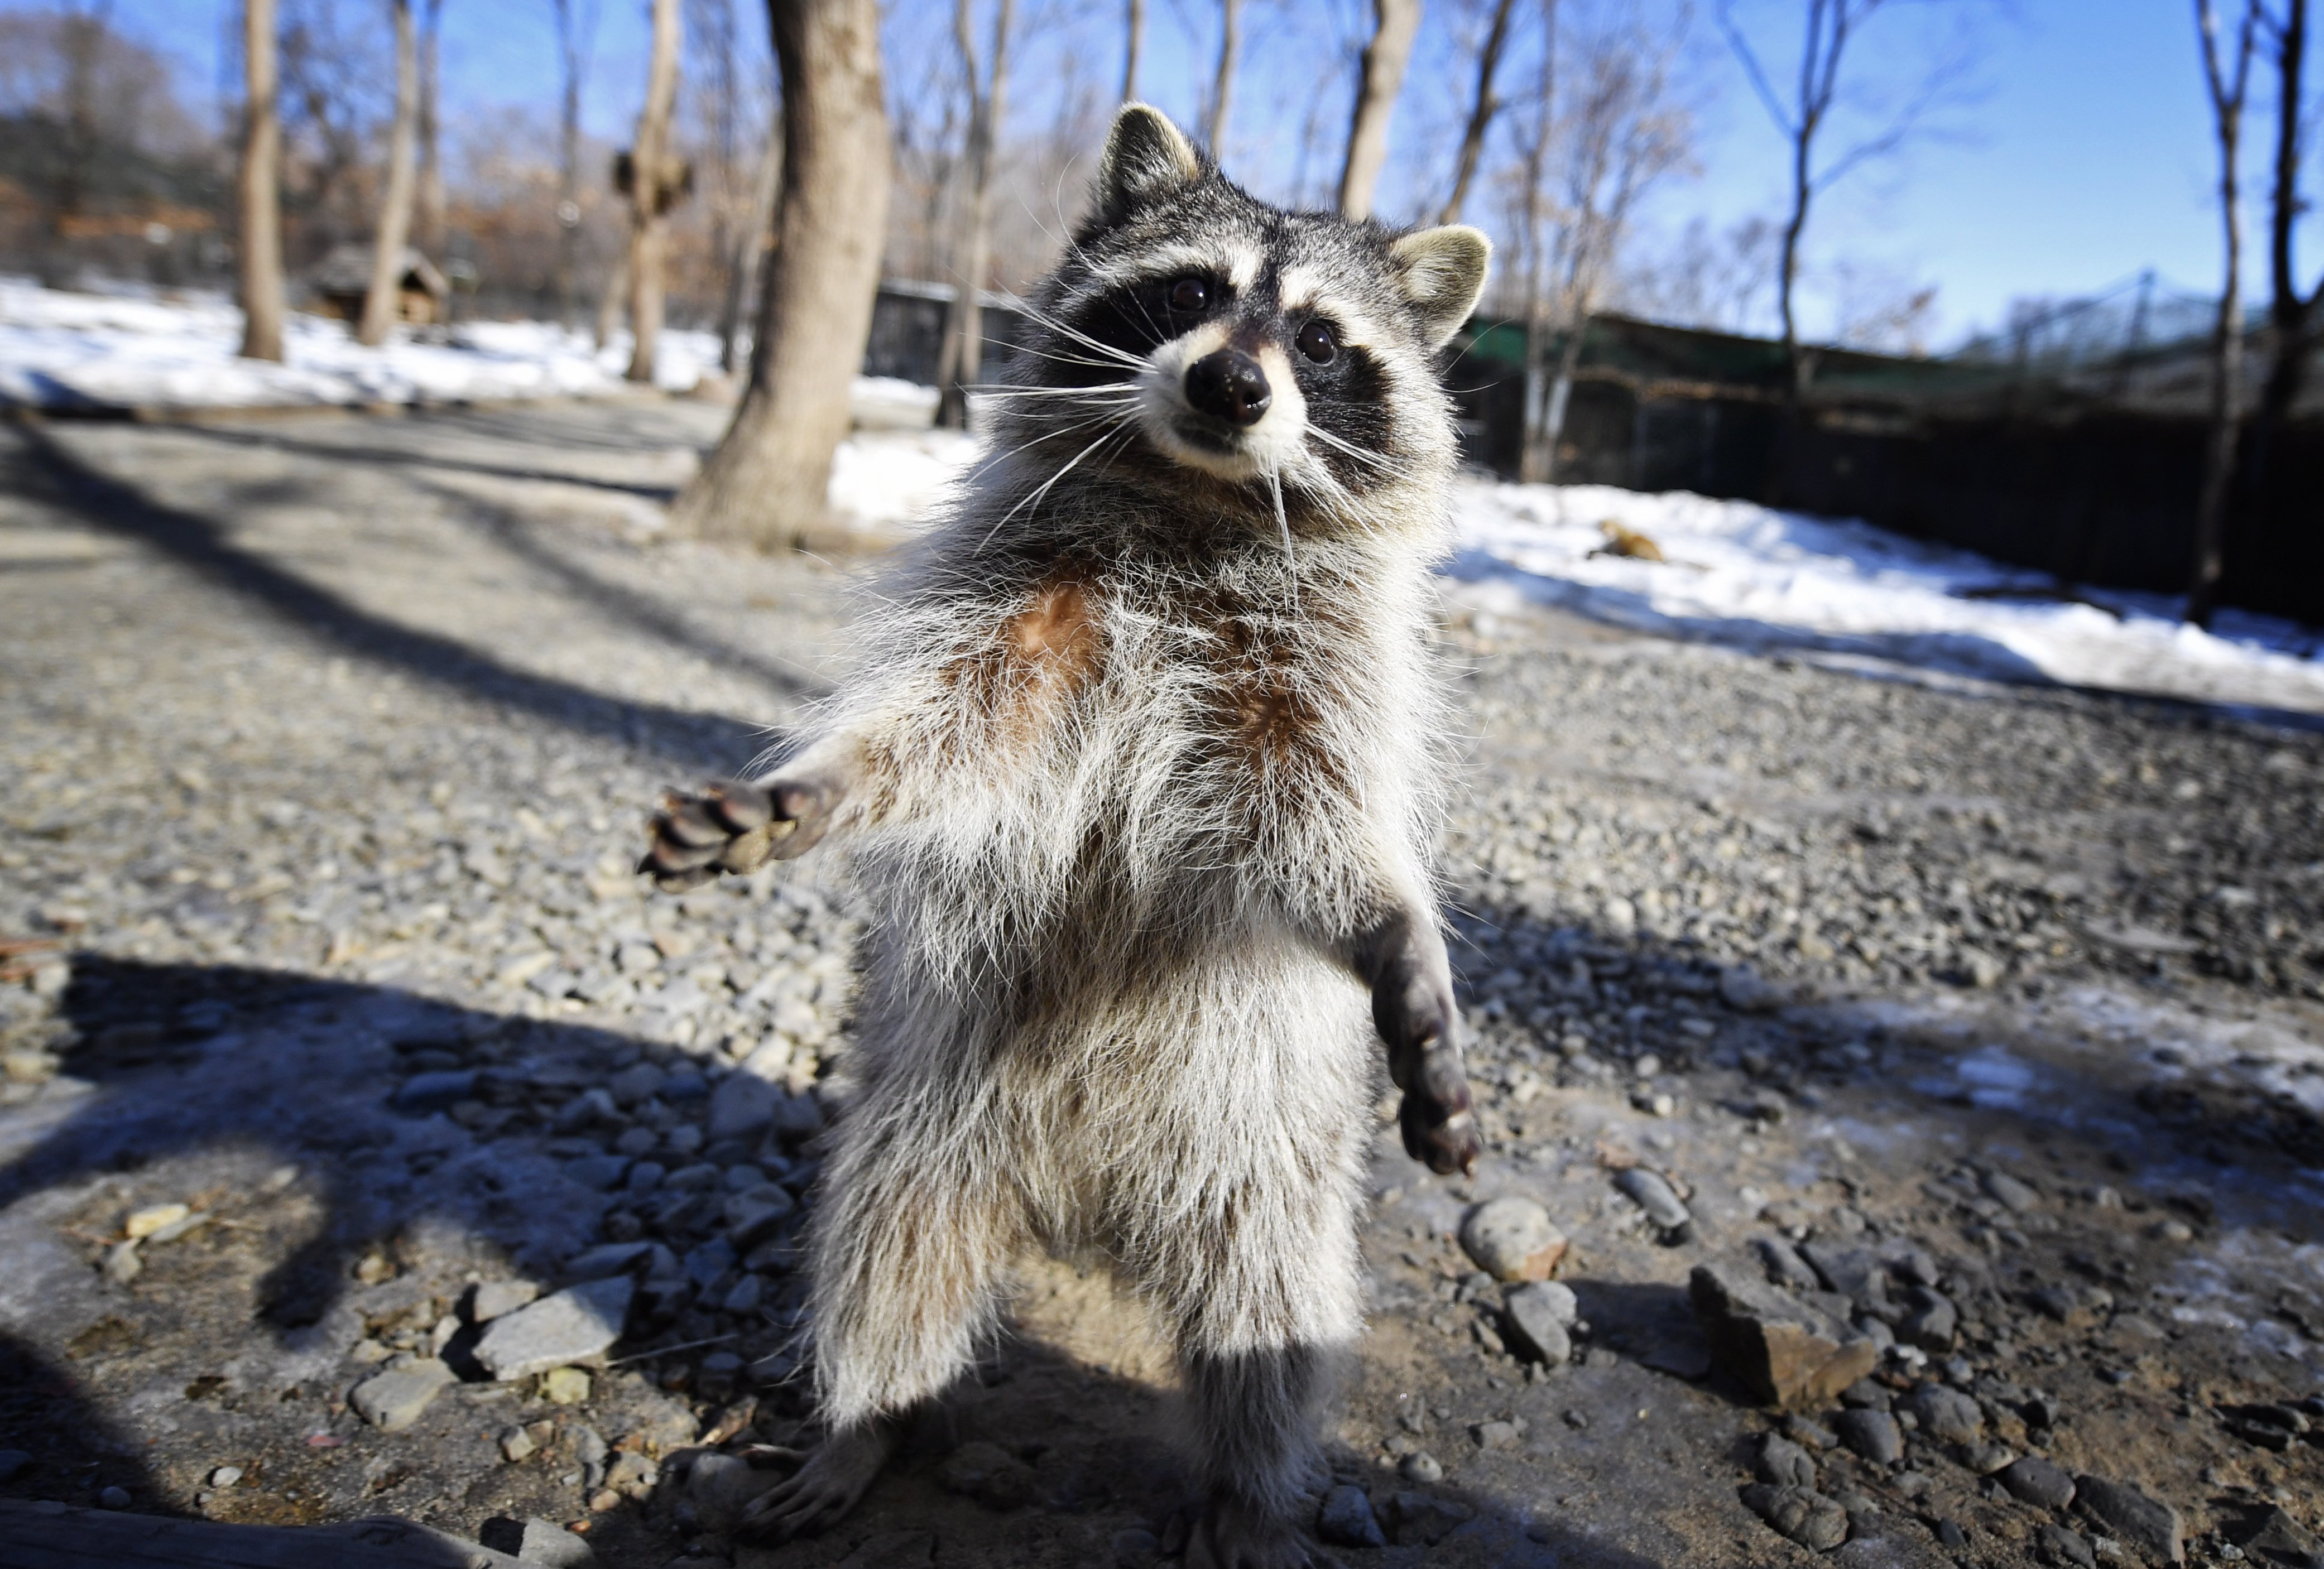 Baby Girl Attacked By Raccoon In North Philadelphia | Time